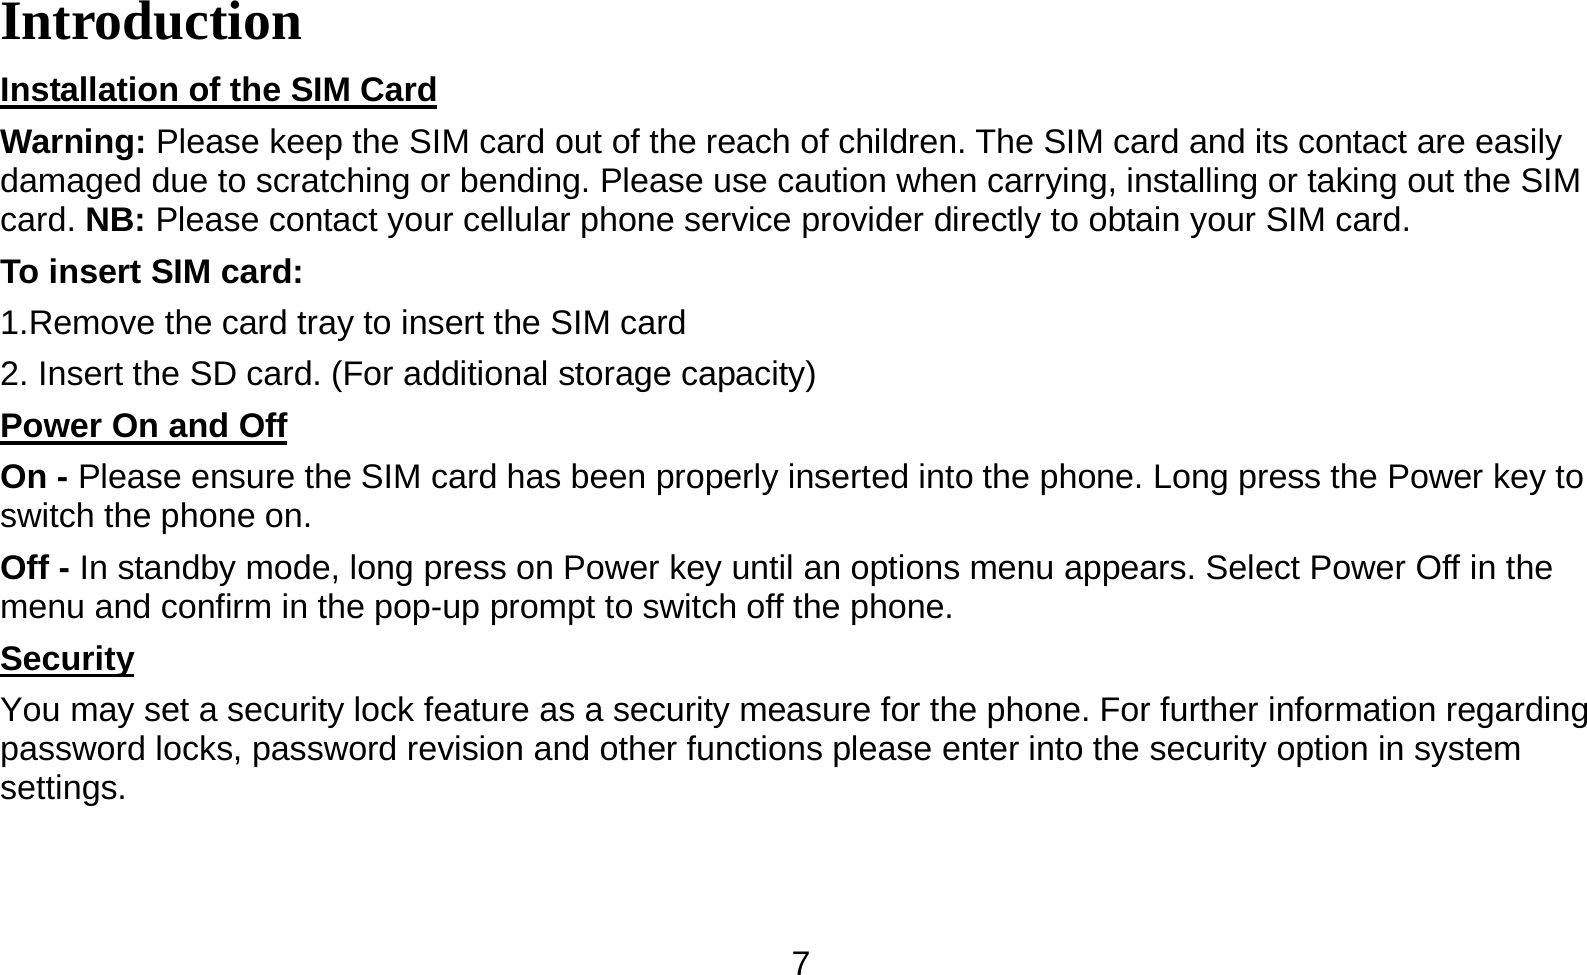   7Introduction Installation of the SIM Card                                                                         Warning: Please keep the SIM card out of the reach of children. The SIM card and its contact are easily damaged due to scratching or bending. Please use caution when carrying, installing or taking out the SIM card. NB: Please contact your cellular phone service provider directly to obtain your SIM card. To insert SIM card: 1.Remove the card tray to insert the SIM card   2. Insert the SD card. (For additional storage capacity) Power On and Off                                                                                  On - Please ensure the SIM card has been properly inserted into the phone. Long press the Power key to switch the phone on. Off - In standby mode, long press on Power key until an options menu appears. Select Power Off in the menu and confirm in the pop-up prompt to switch off the phone. Security                                                                                           You may set a security lock feature as a security measure for the phone. For further information regarding password locks, password revision and other functions please enter into the security option in system settings. 